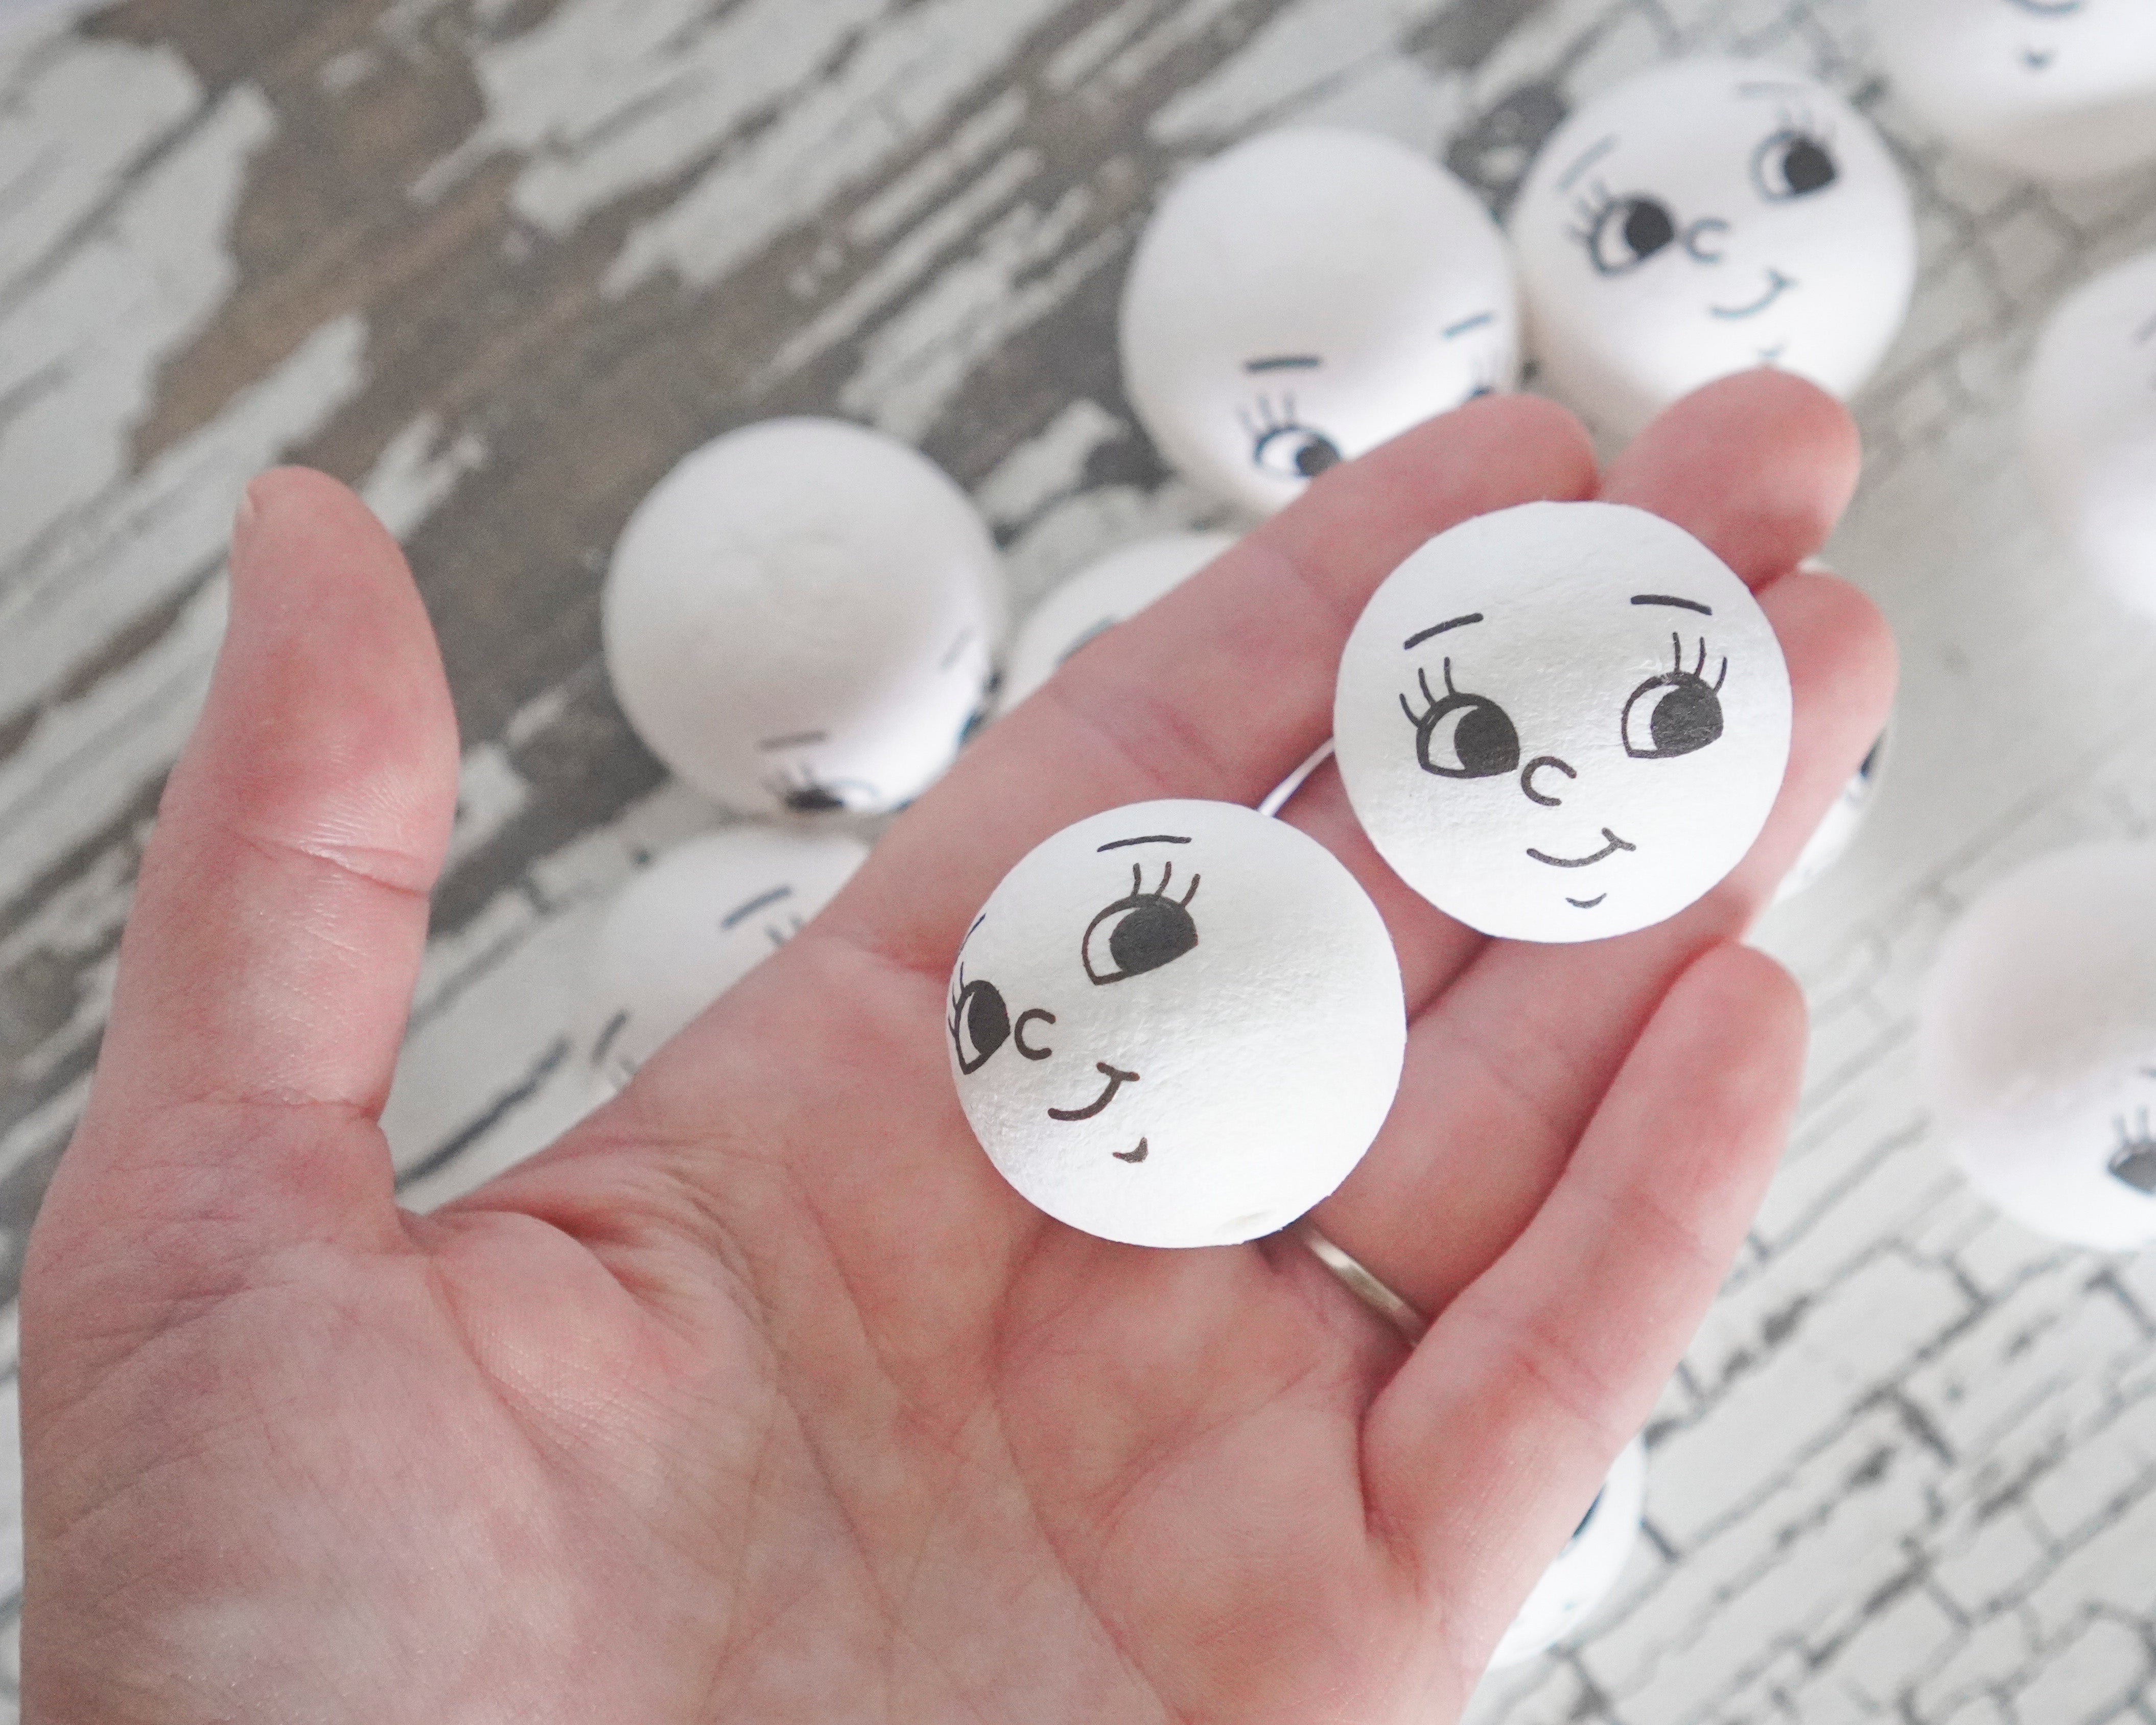 30mm Spun Cotton Heads: BRIGHT EYES - Vintage-Style Craft Heads with Faces, 12 Pcs.